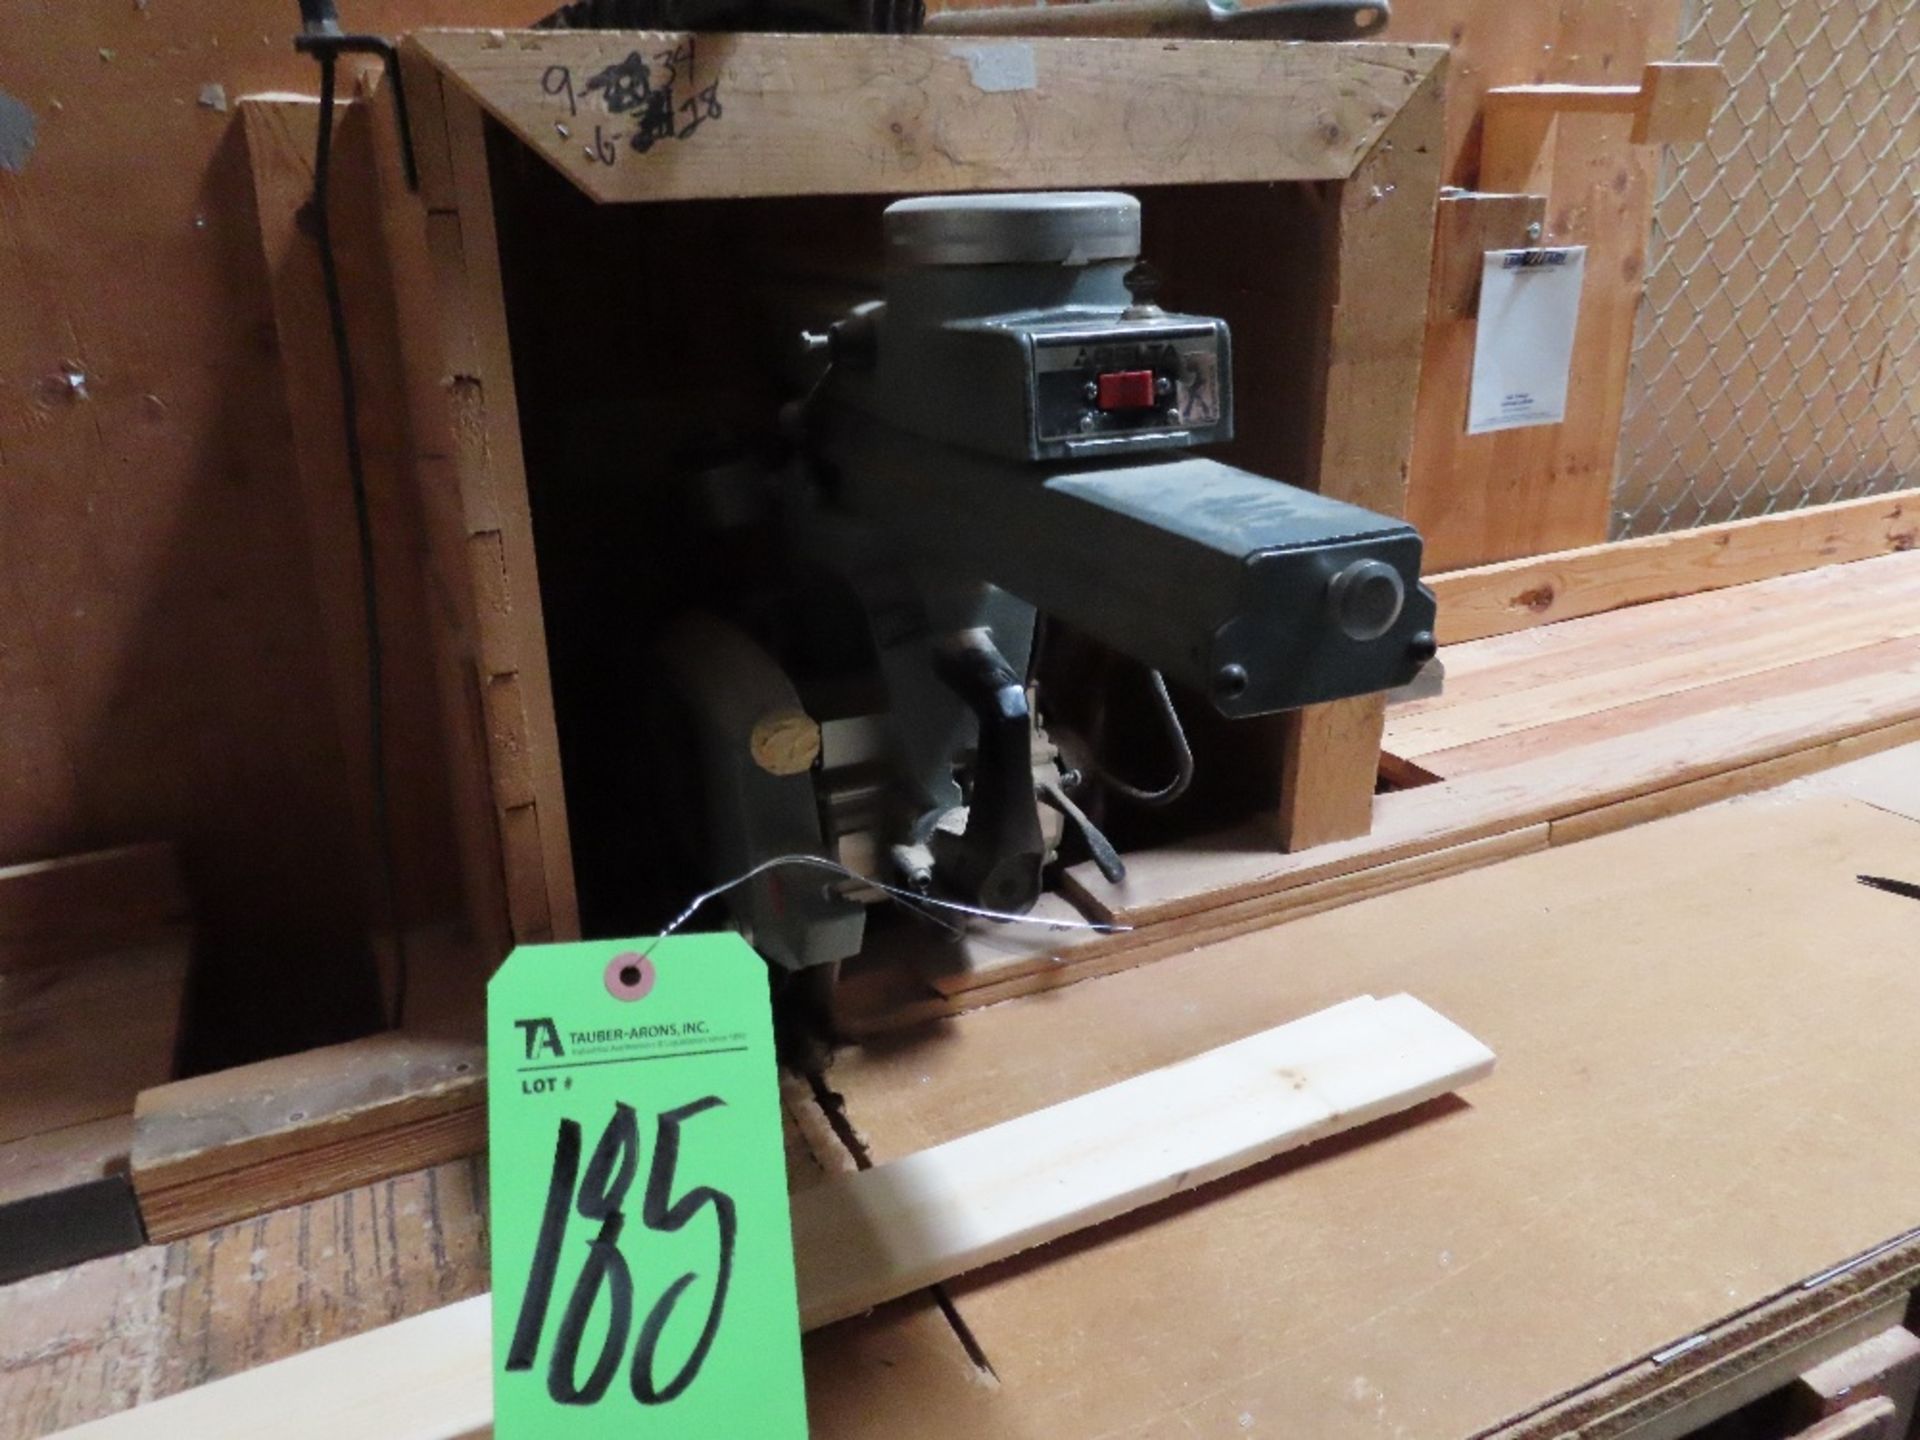 Delta Radial Arm Saw w/ Dust Collector